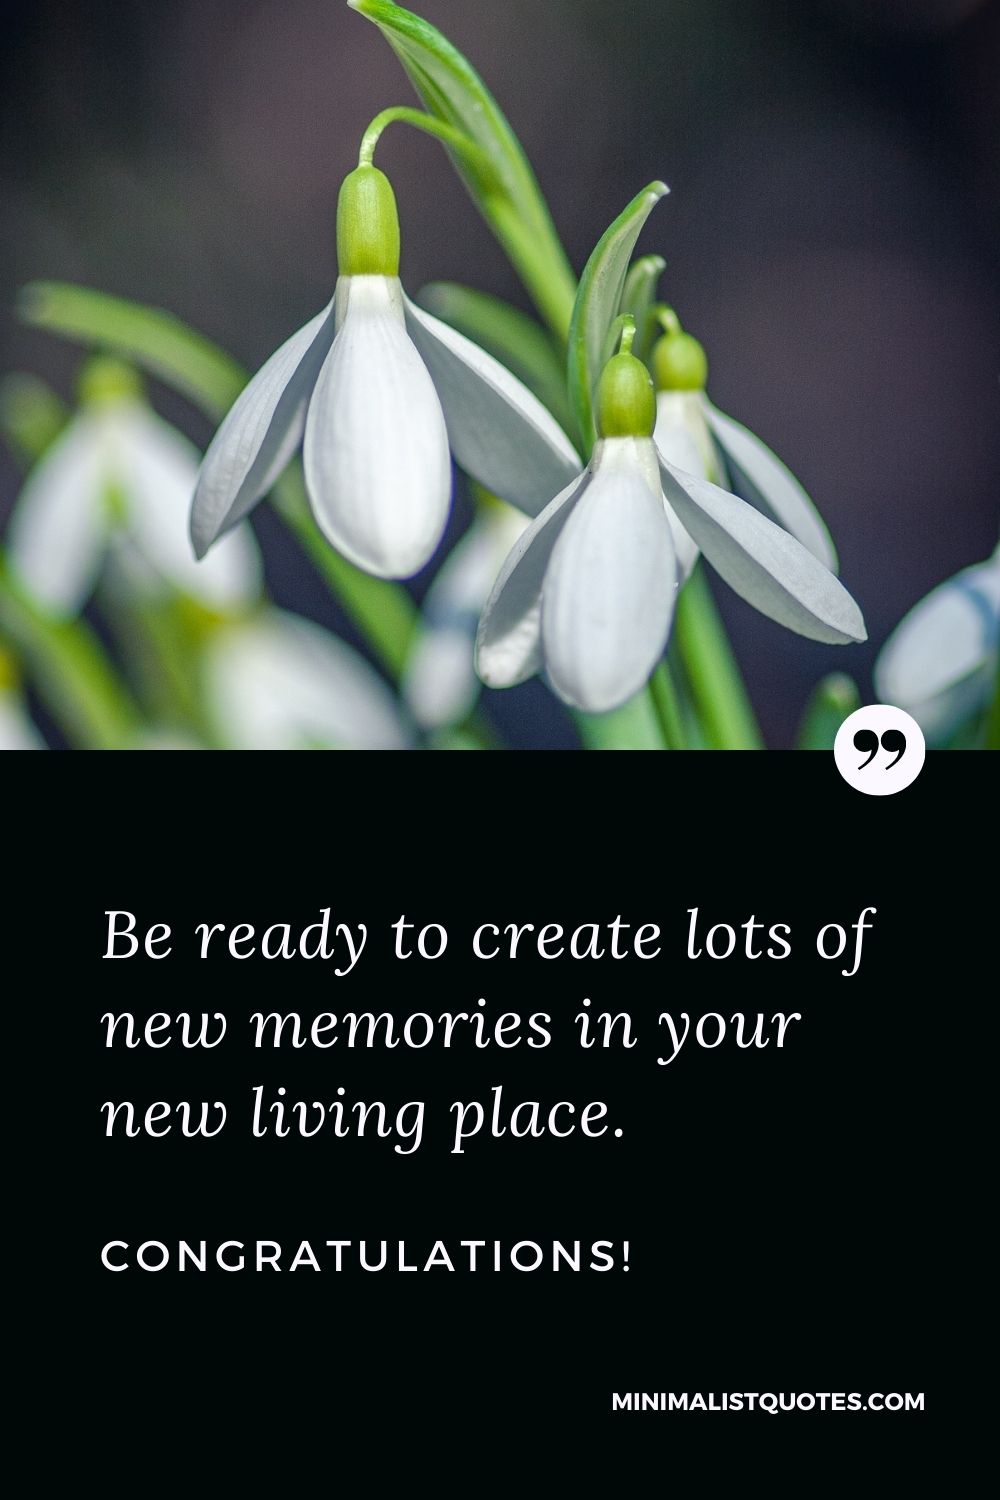 New Home Wish, Quote & Message With Image: Be ready to create lots of new memories in your new living place. Congratulations!